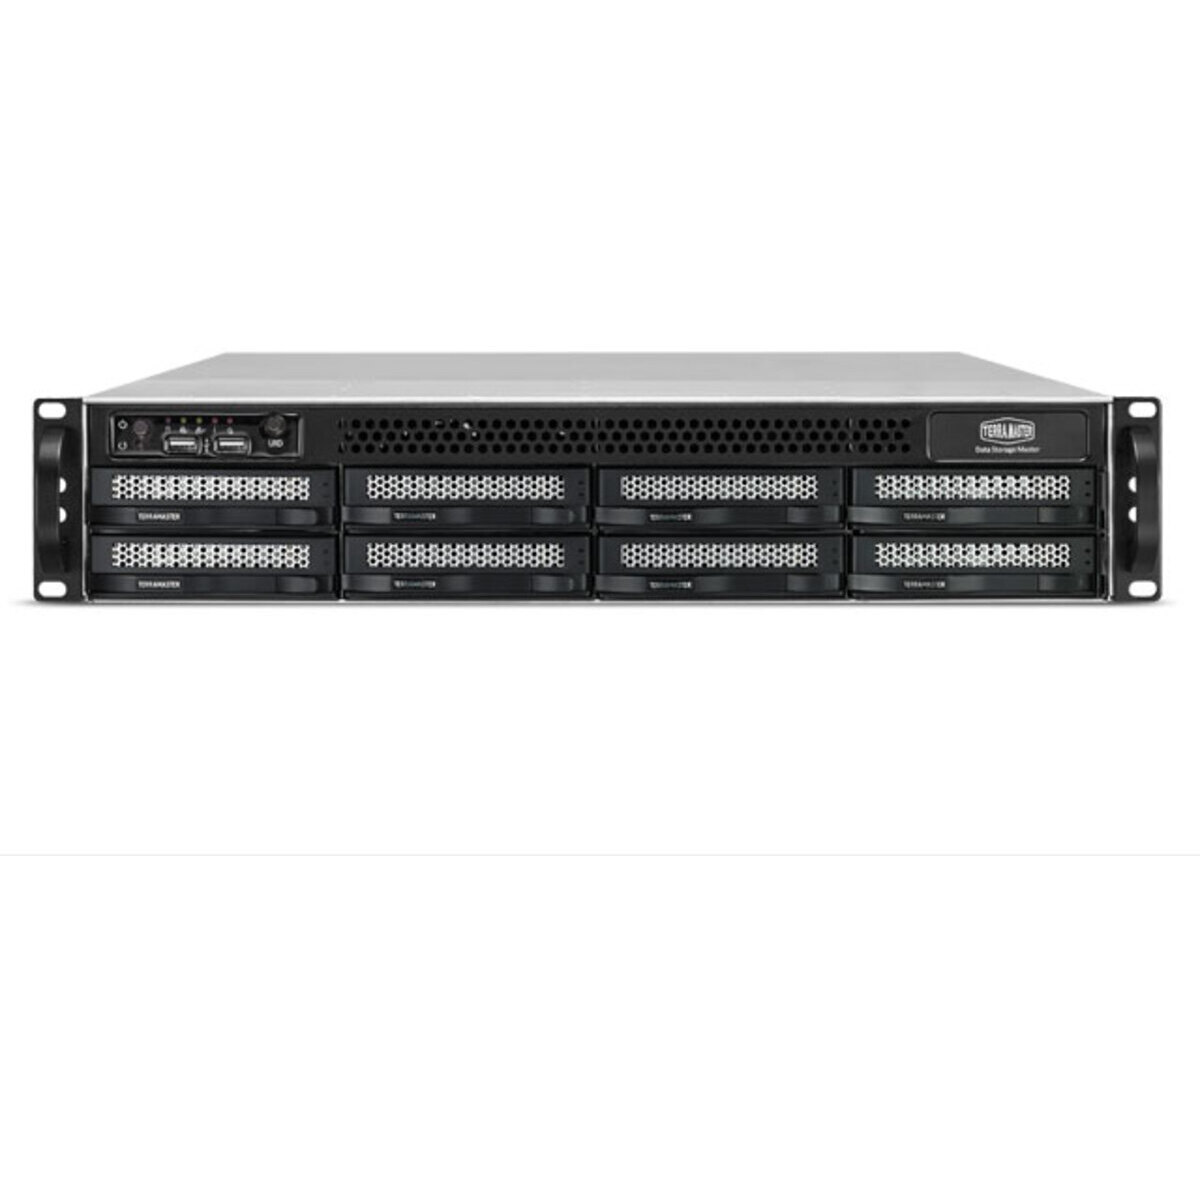 TerraMaster U8-522-9400 128tb 8-Bay RackMount Large Business / Enterprise NAS - Network Attached Storage Device 8x16tb Seagate EXOS X18 ST16000NM000J 3.5 7200rpm SATA 6Gb/s HDD ENTERPRISE Class Drives Installed - Burn-In Tested U8-522-9400